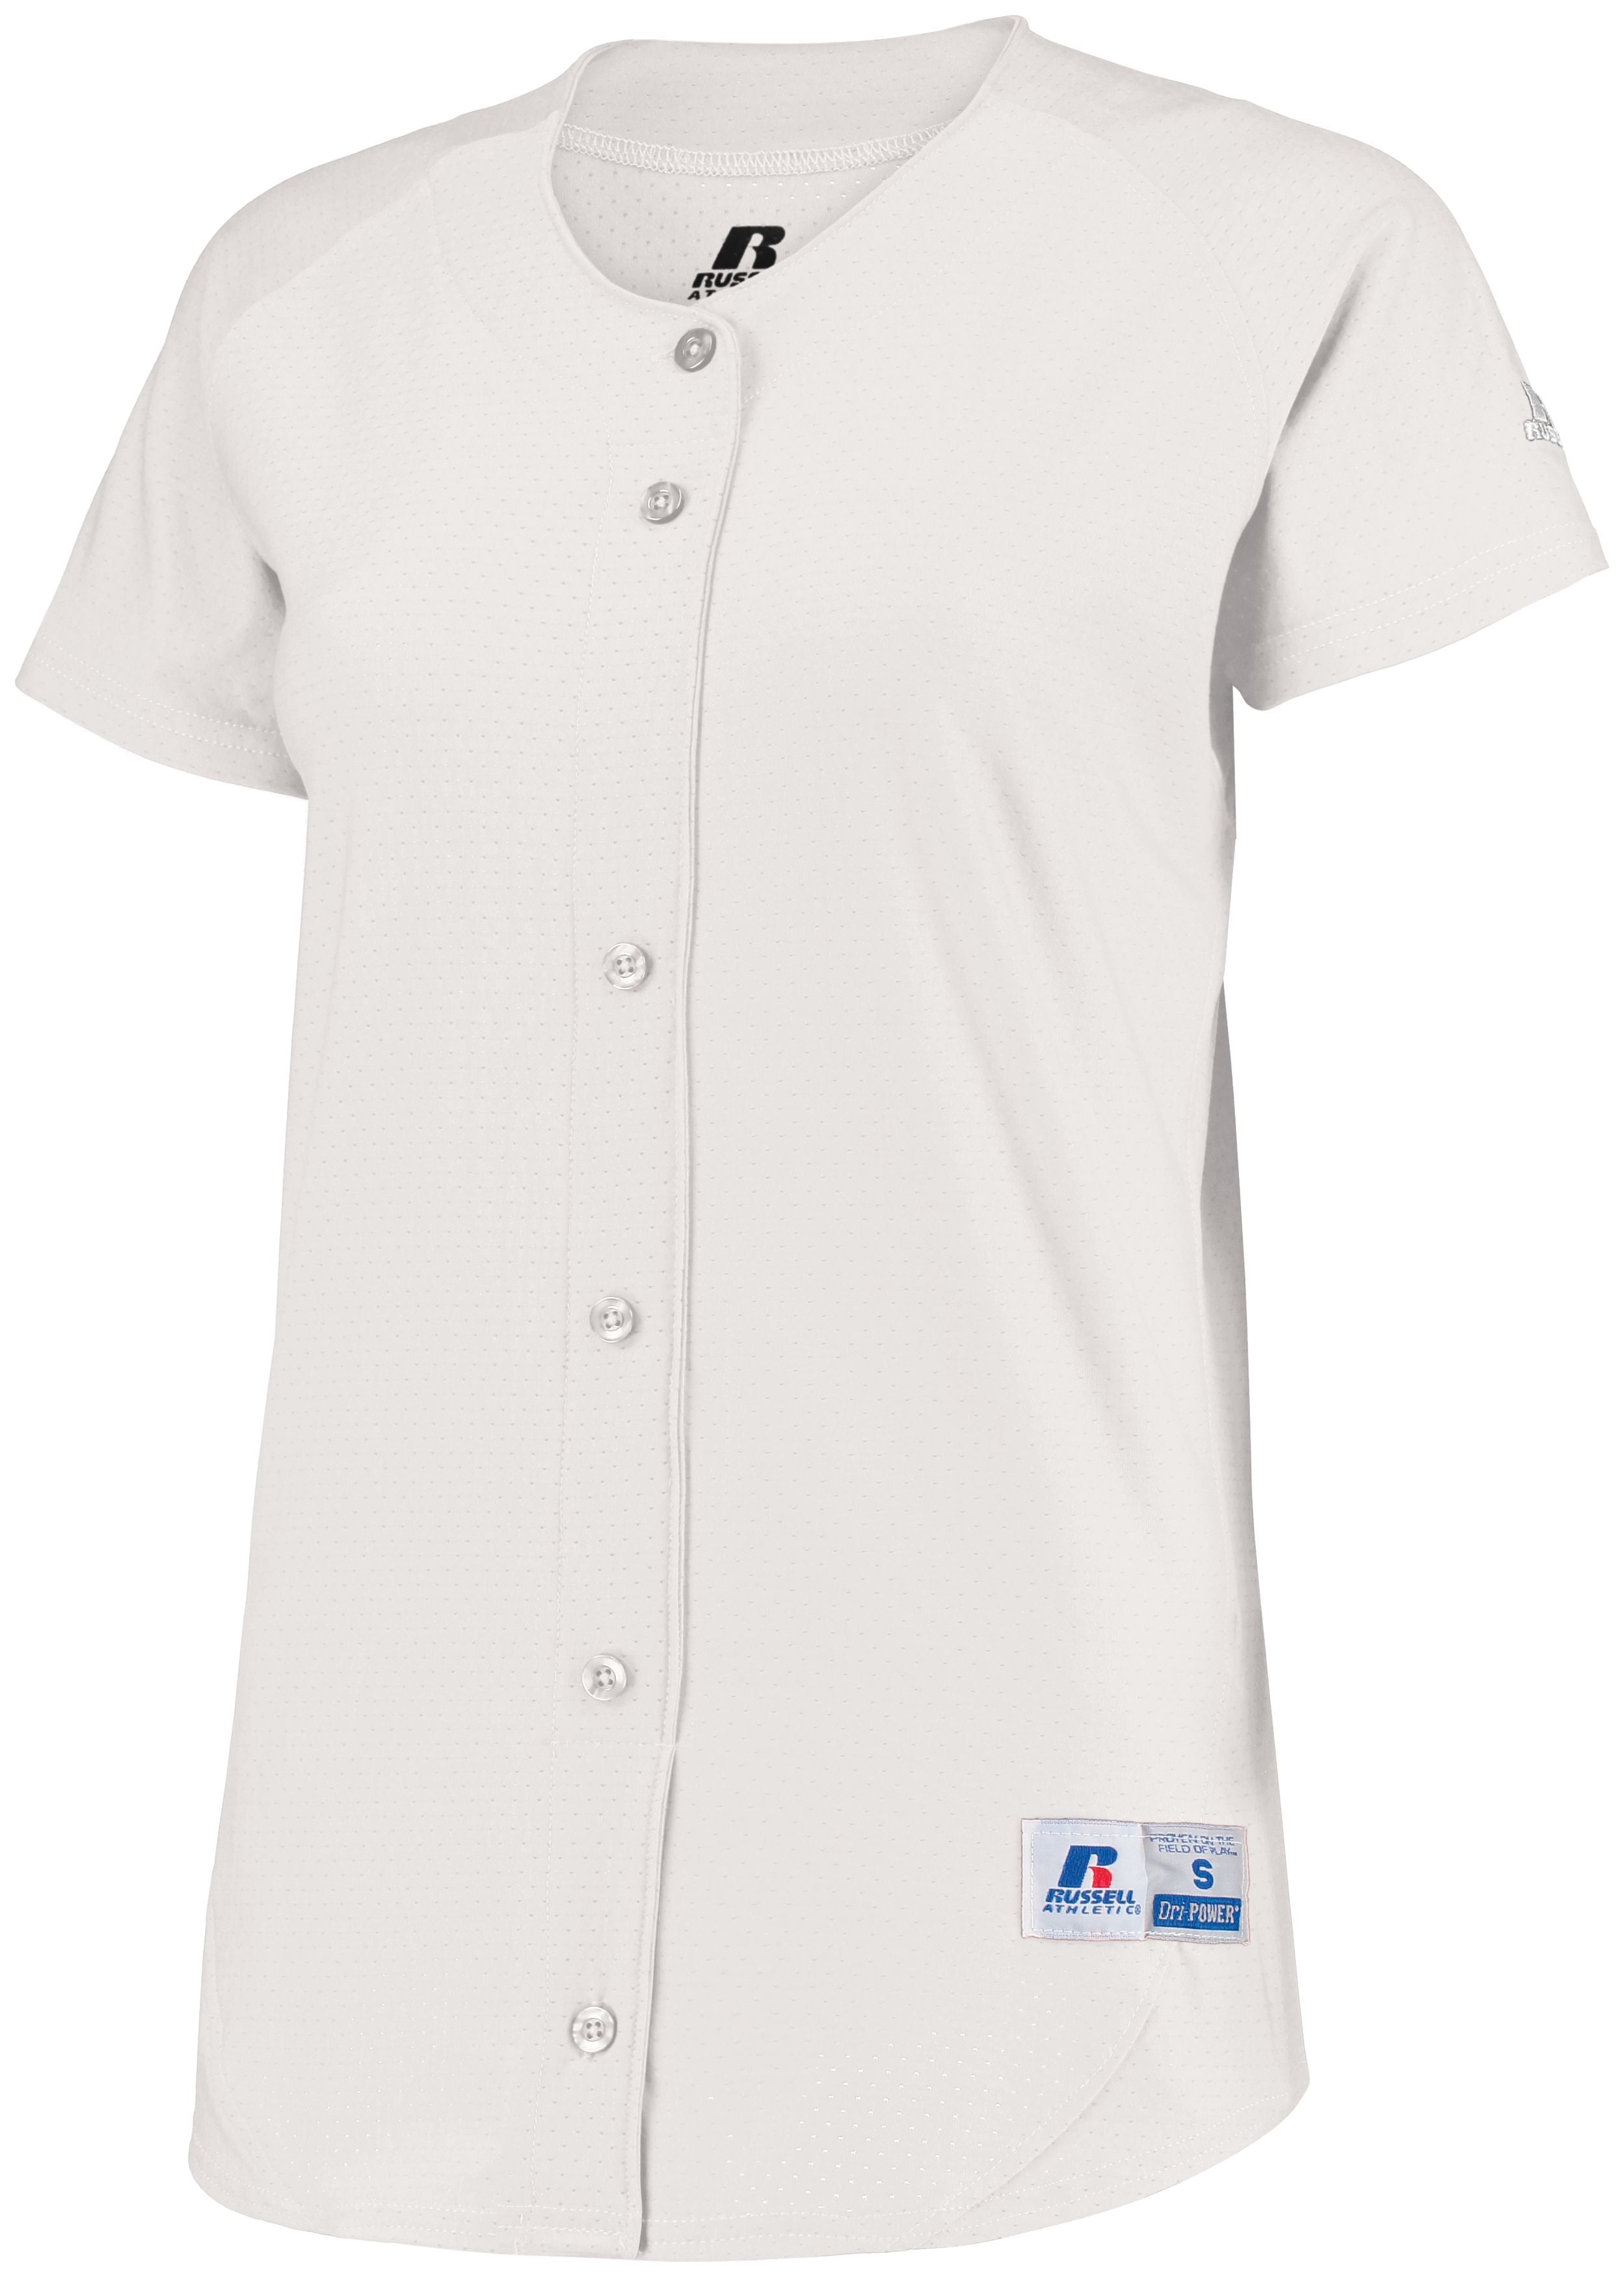 Russell Athletic Ladies Stretch Faux Button Jersey in White  -Part of the Ladies, Ladies-Jersey, Softball, Russell-Athletic-Products, Shirts product lines at KanaleyCreations.com